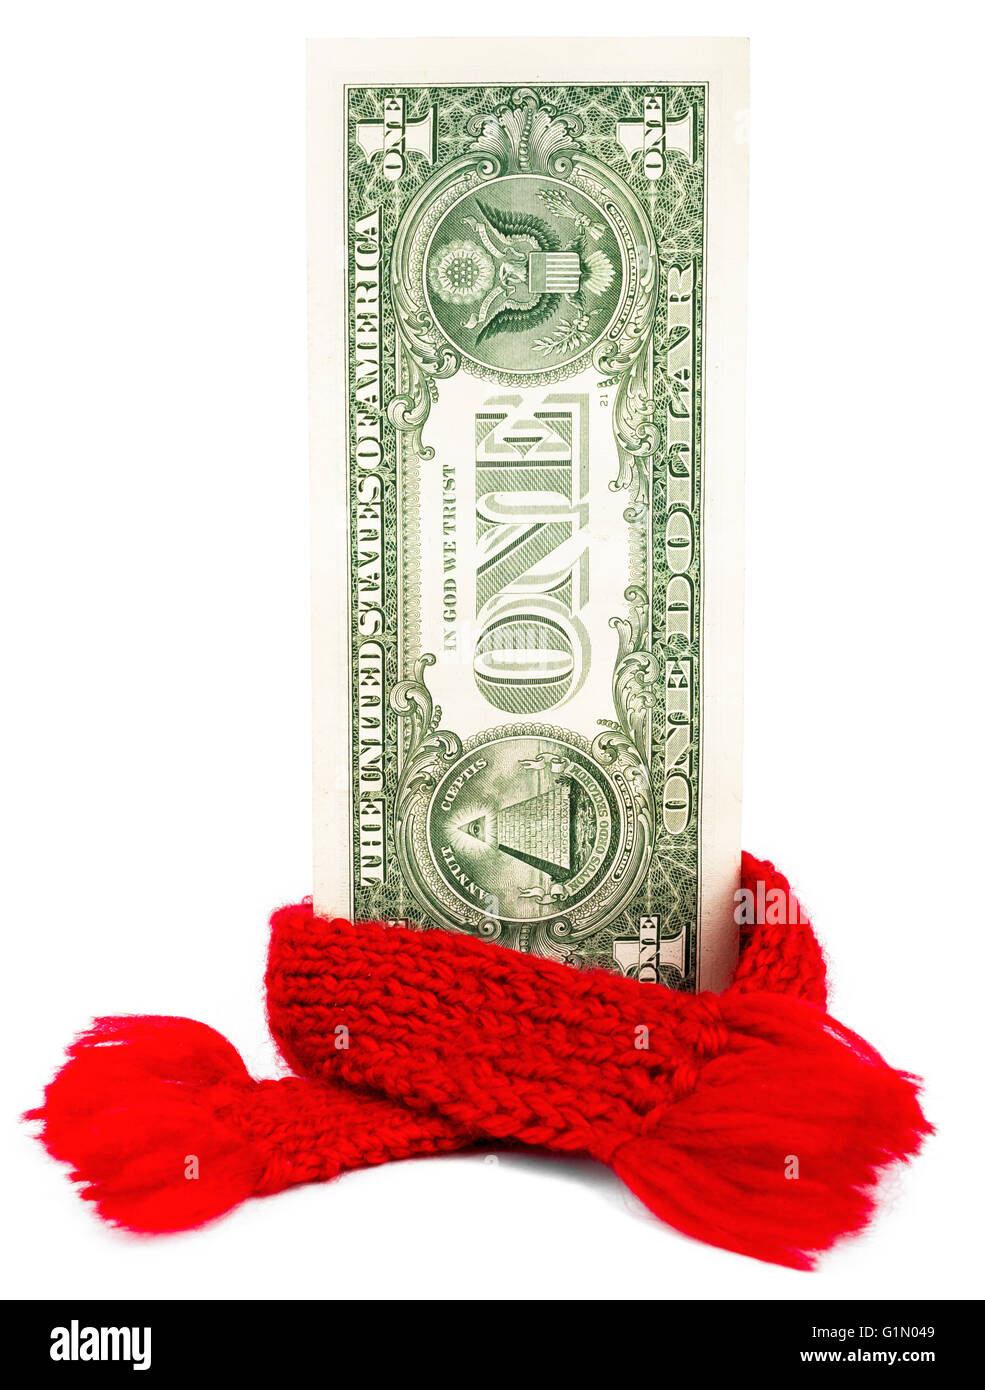 One dollar banknote with red scarf Stock Photo